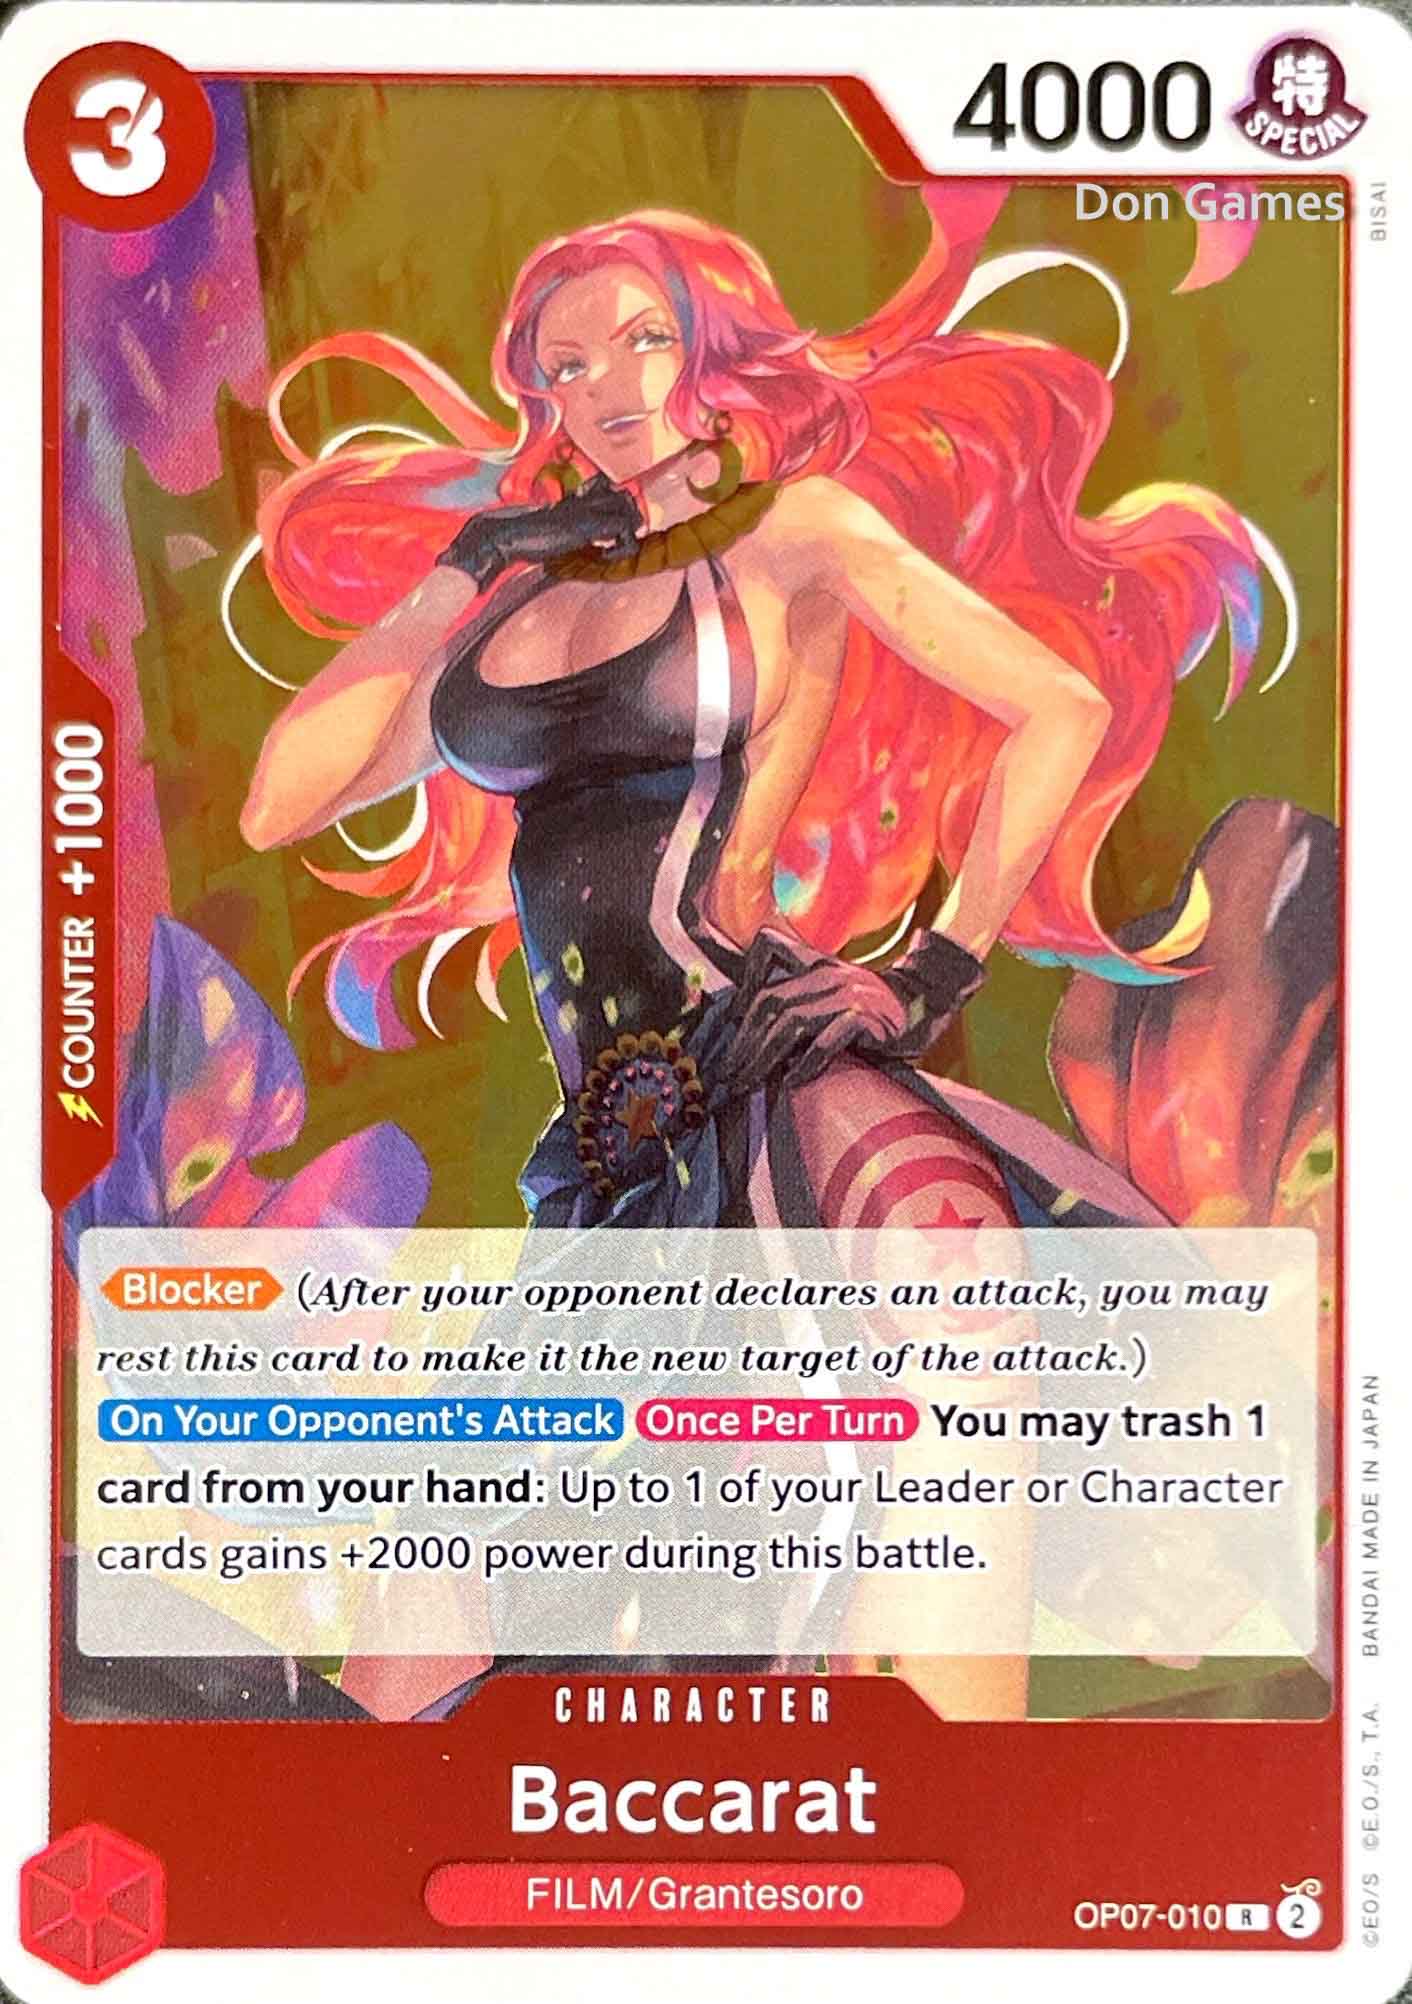 OP07-010 Baccarat Character Card